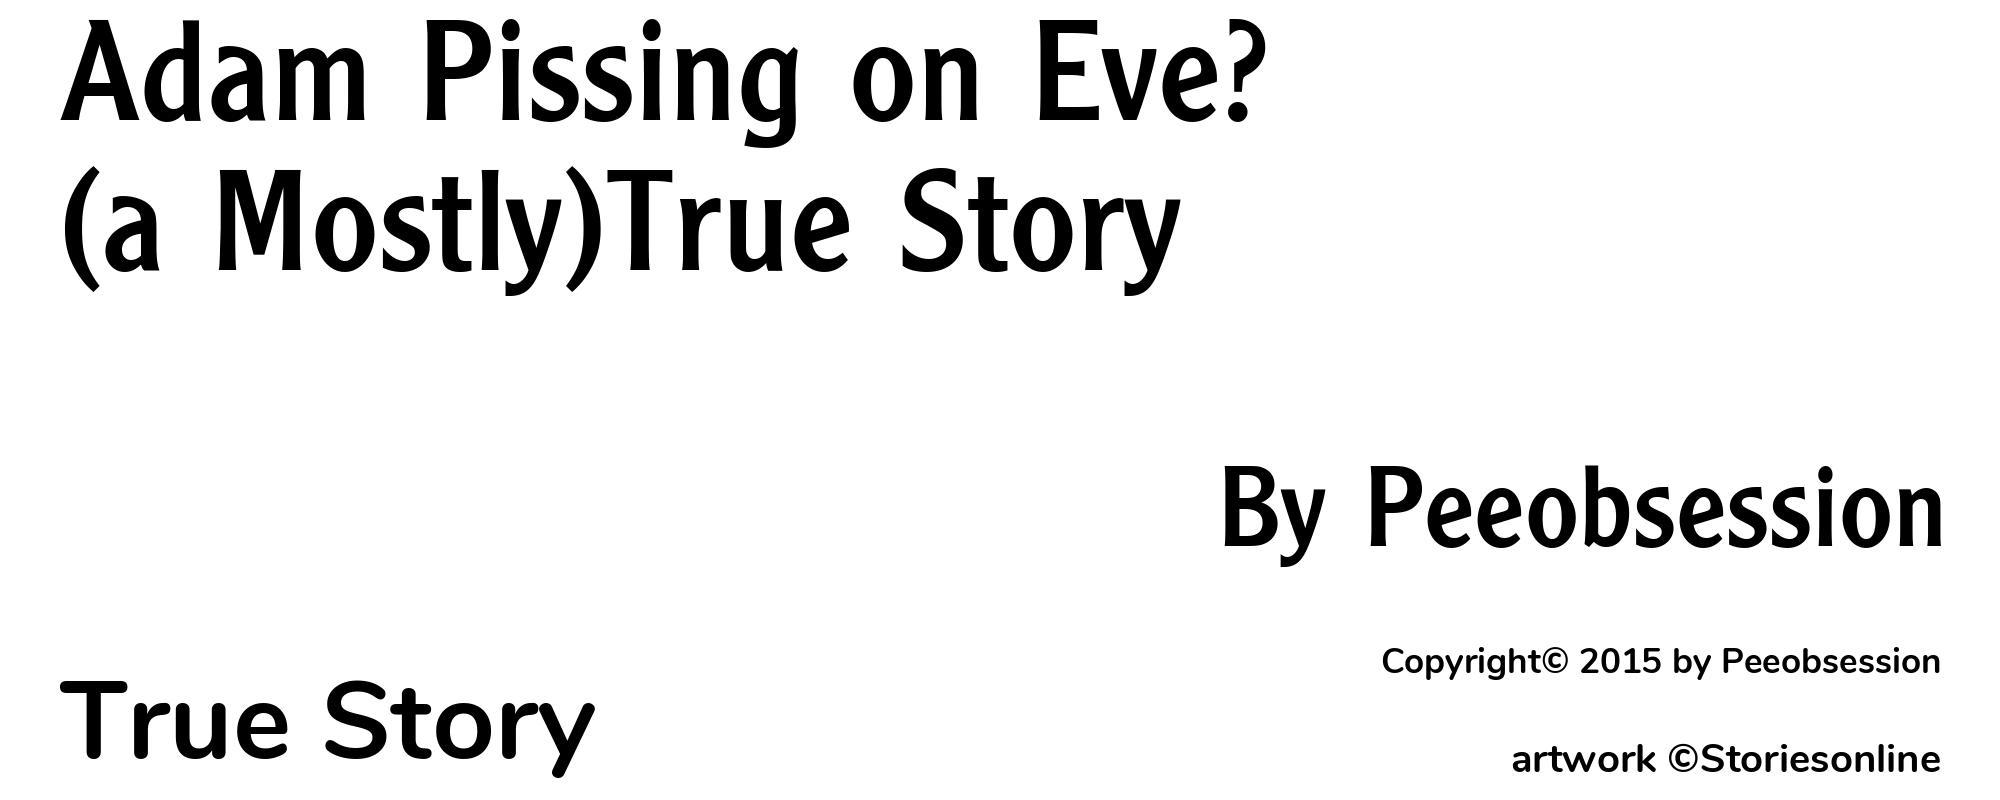 Adam Pissing on Eve? (a Mostly)True Story - Cover